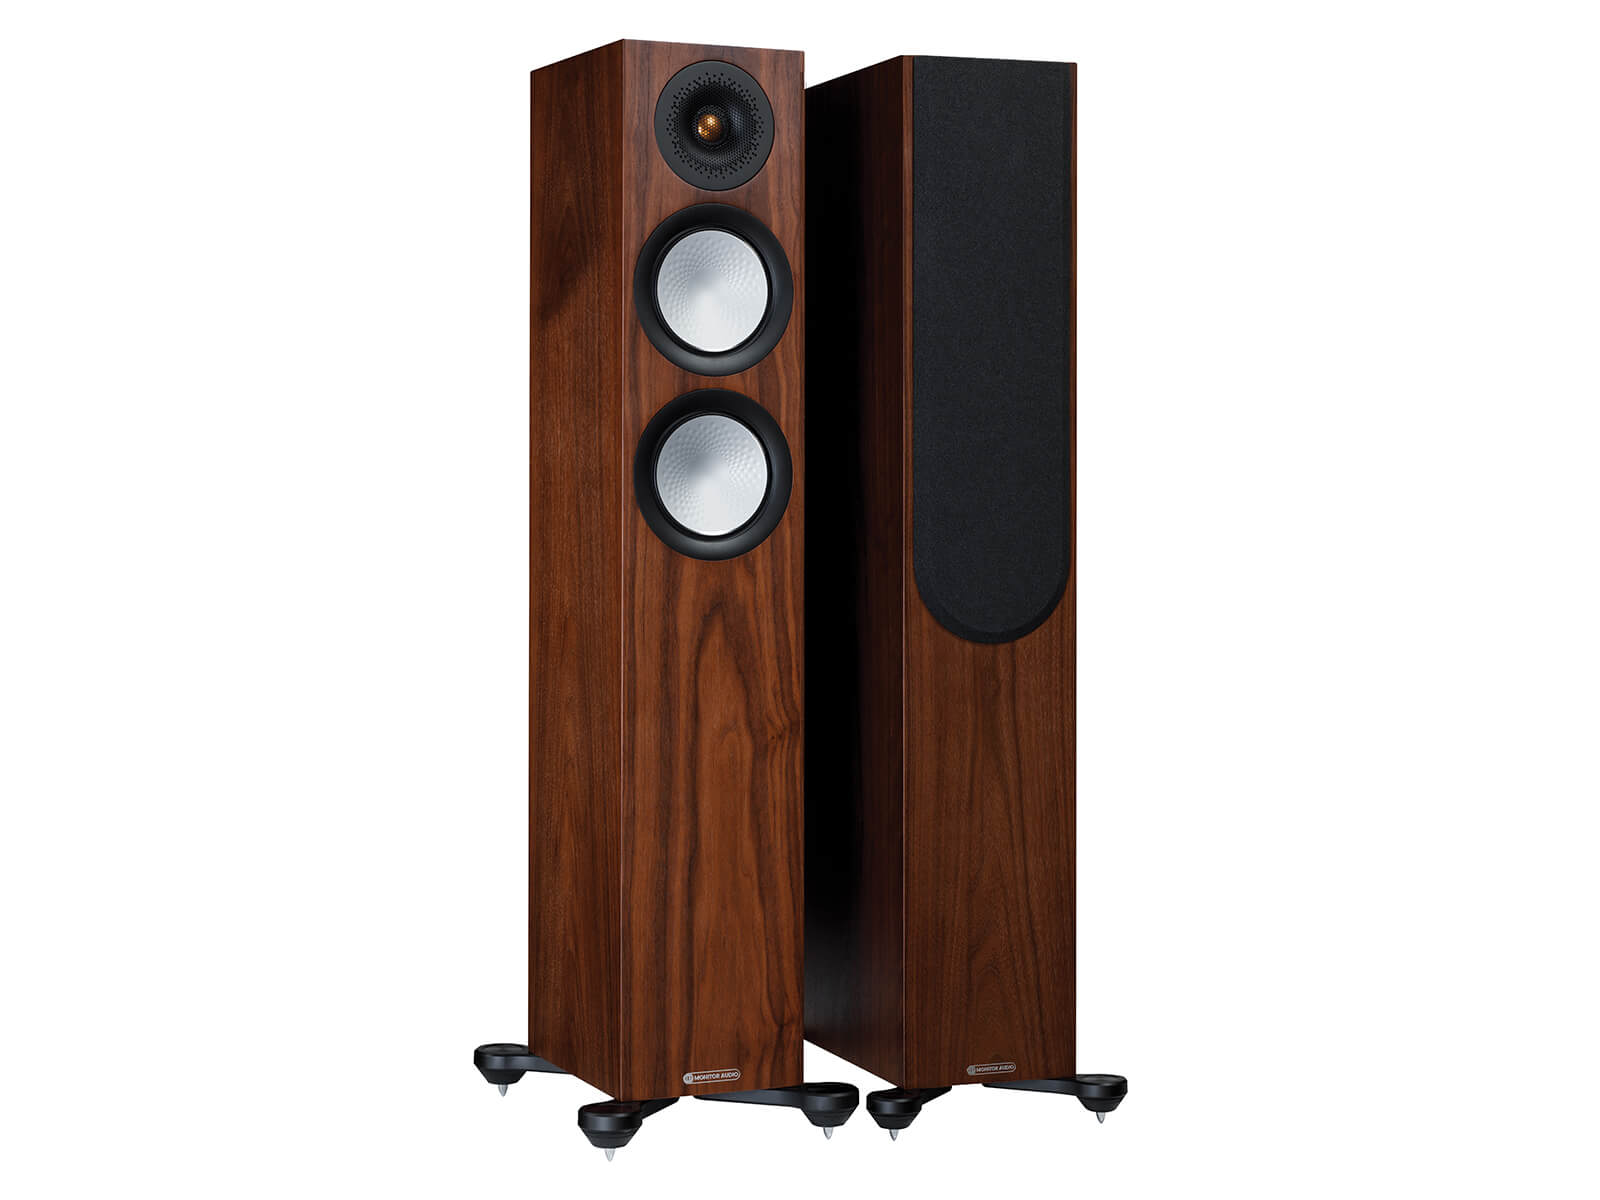 A pair of Monitor Audio's Silver 200 7G, in a natural walnut finish, iso view, with and without grilles.